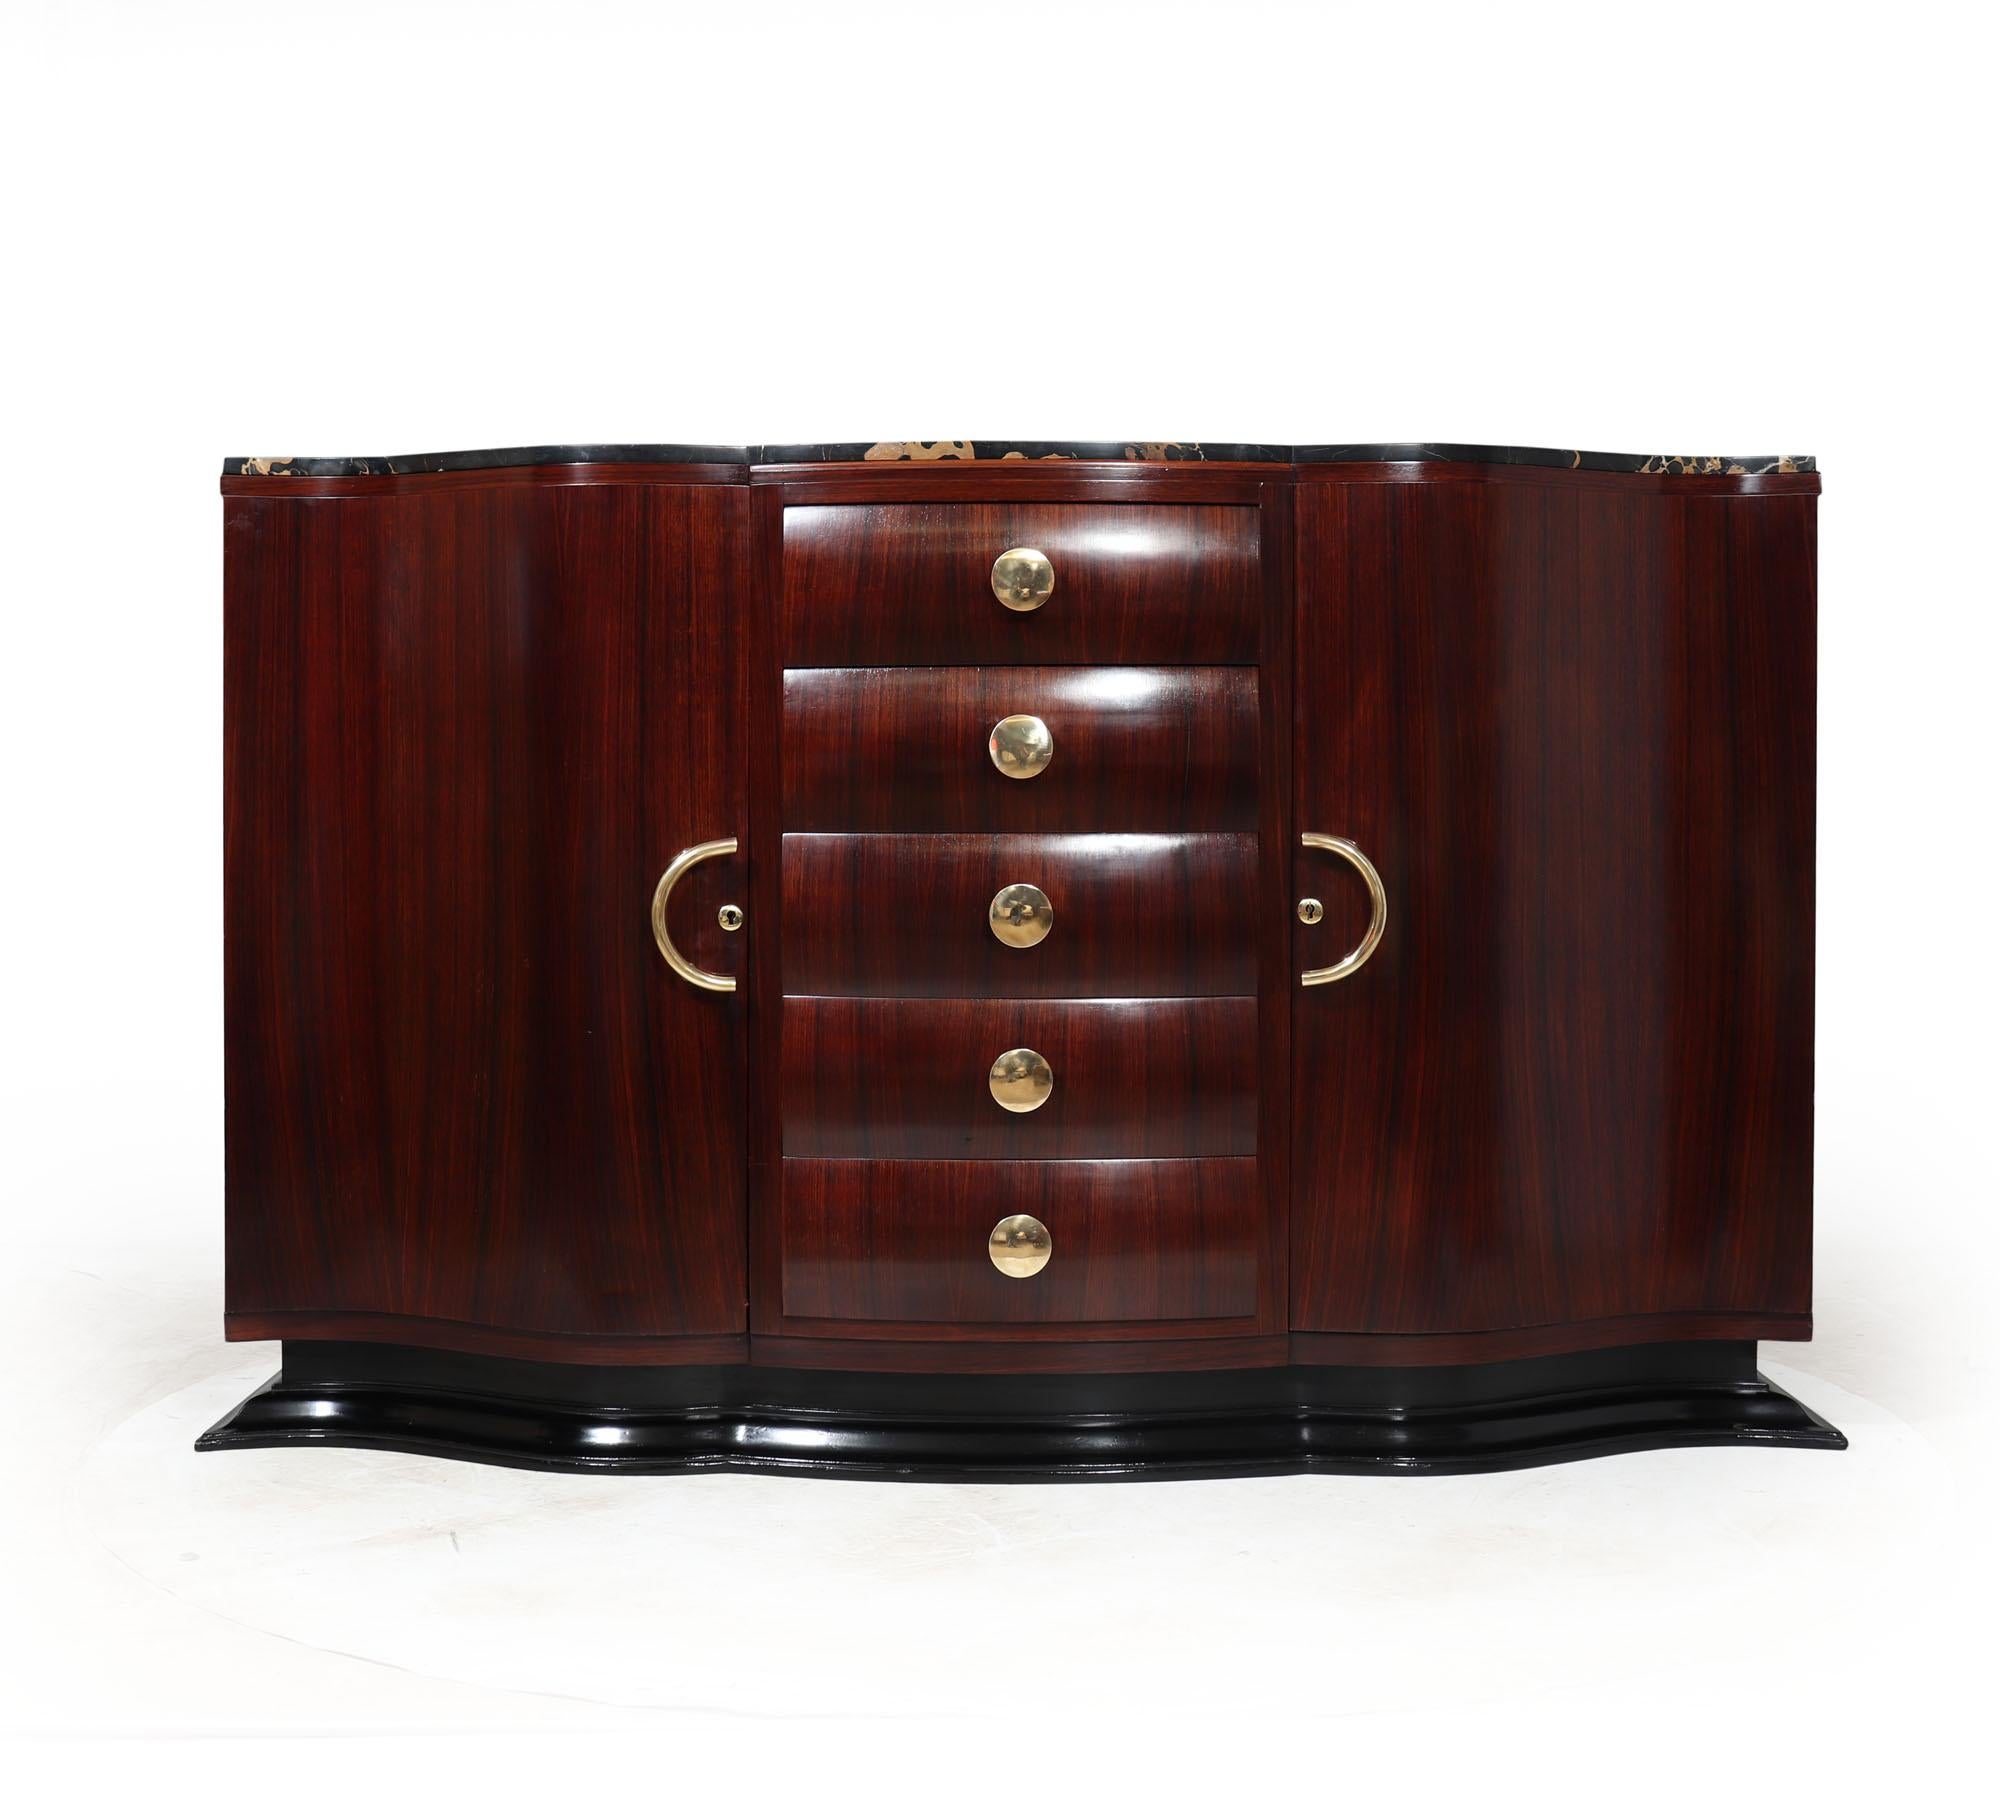 FRENCH ART DECO SIDEBOARD
A stunning serpentine shaped Art Deco sideboard having a Nero Portoro marble top , with five central drawers flanked by two lockable cupboards with fixed shelves behind, solid brass handles and standing on an ebonised